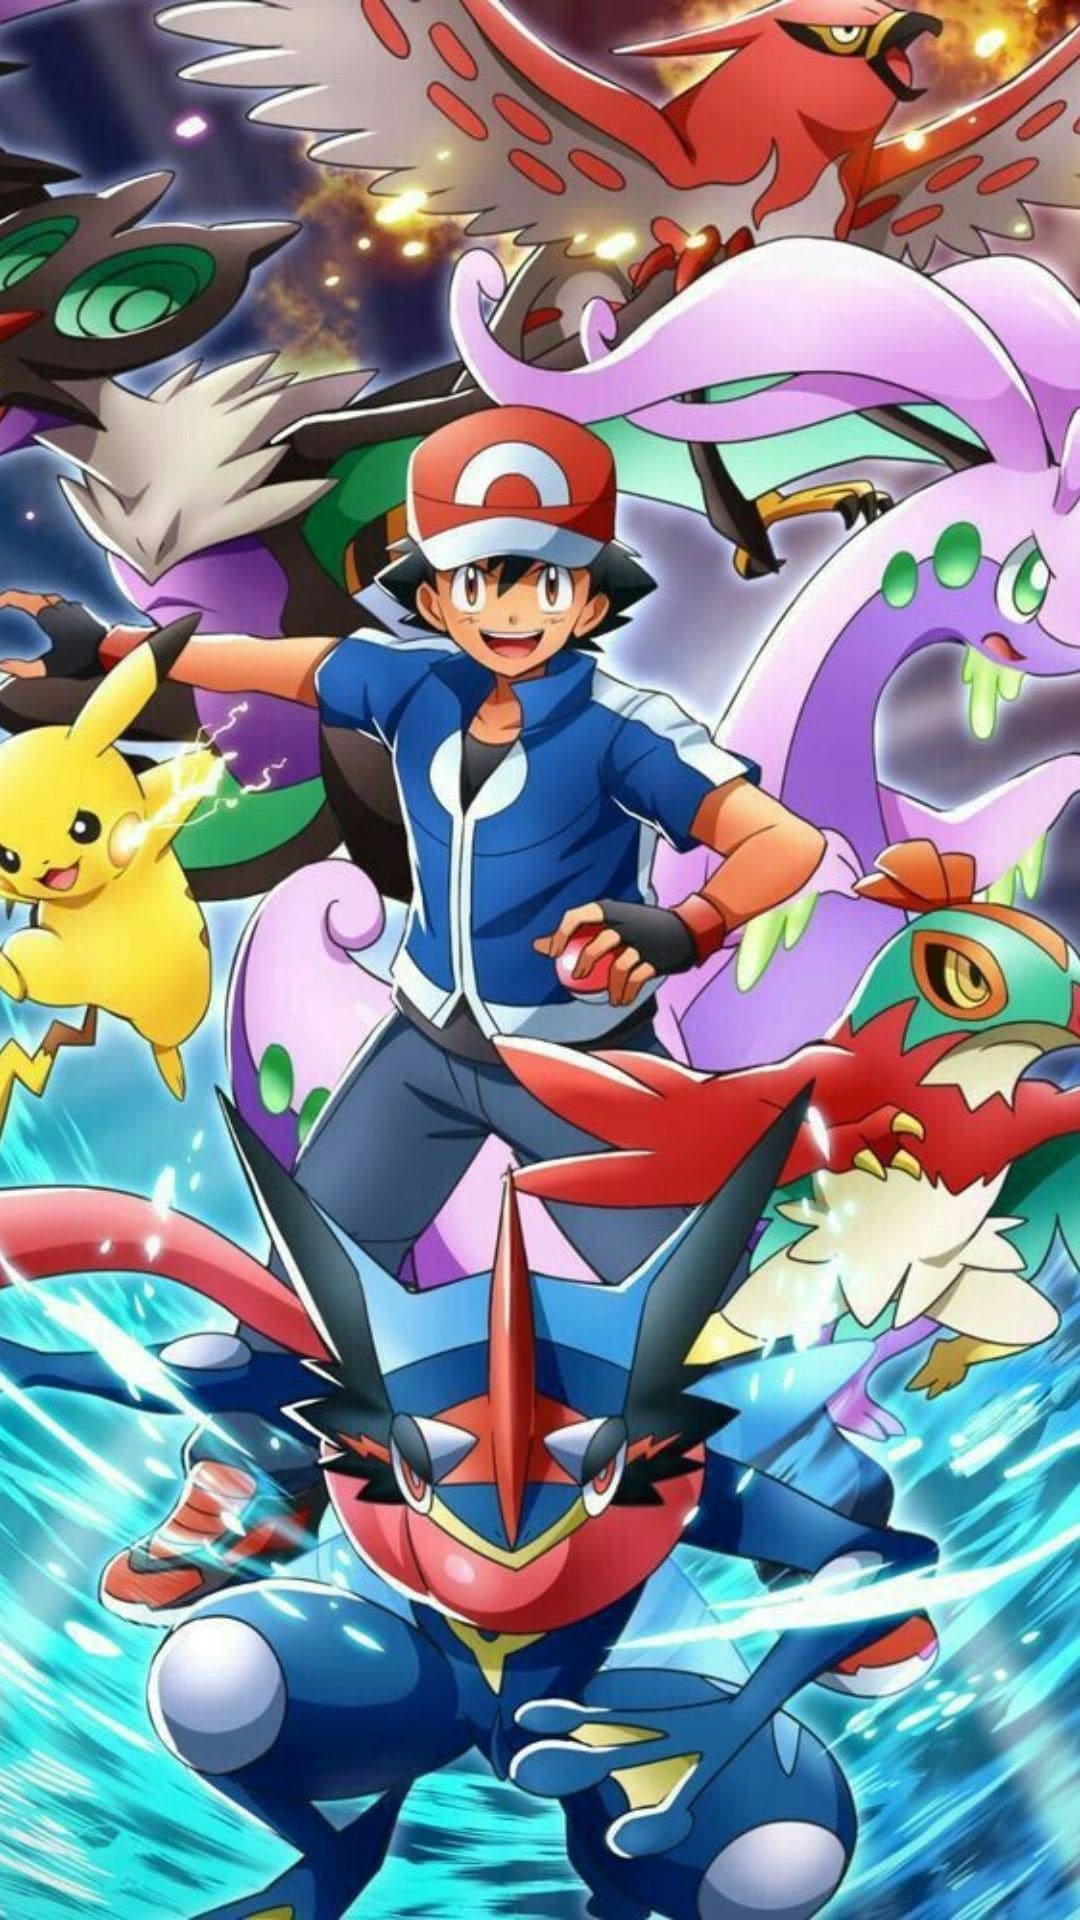 Pokemon: Every Pokemon Movie Ranked From Best To Worst